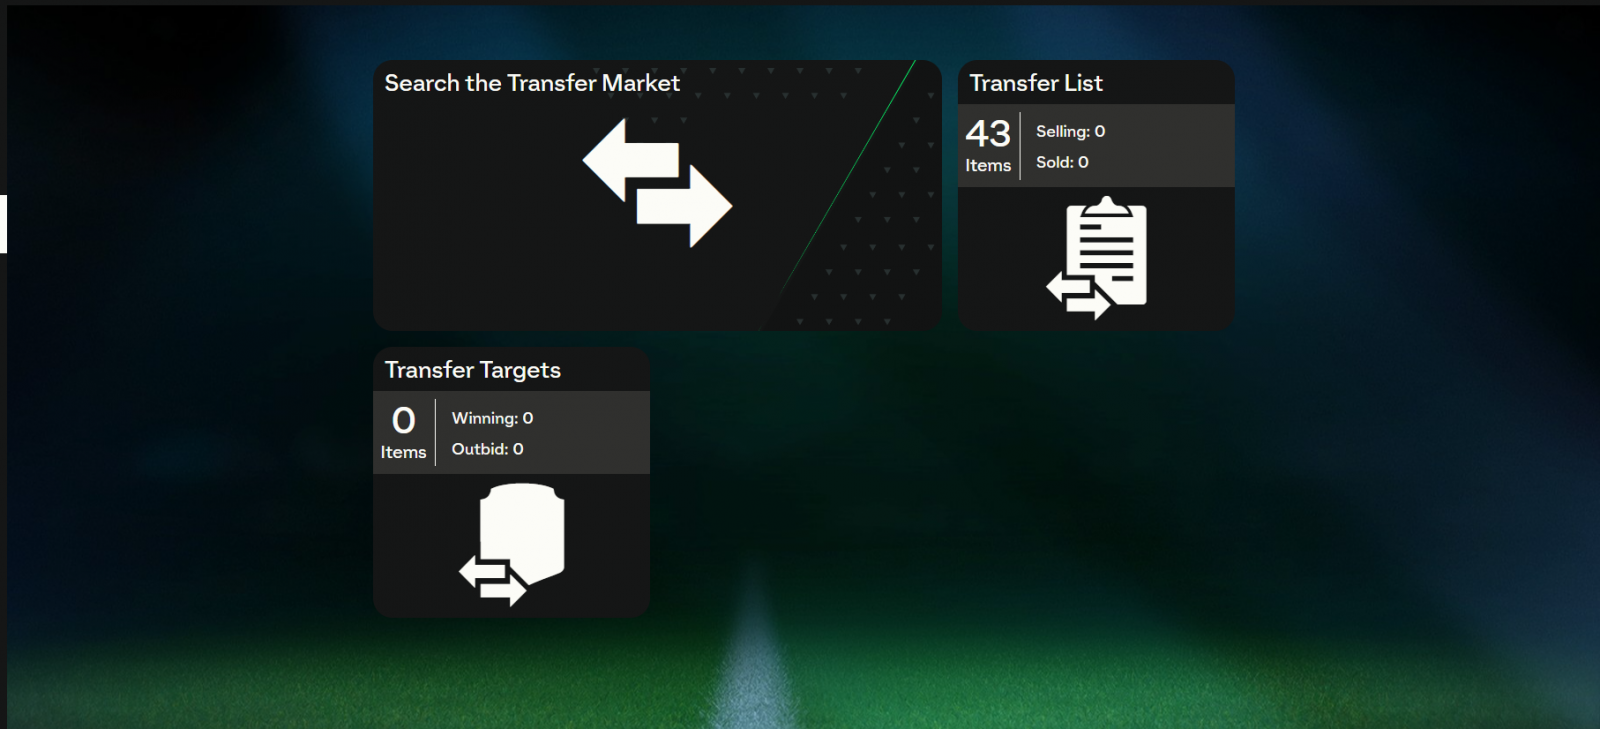 FIFA Web App: How To Get Transfer Market Access